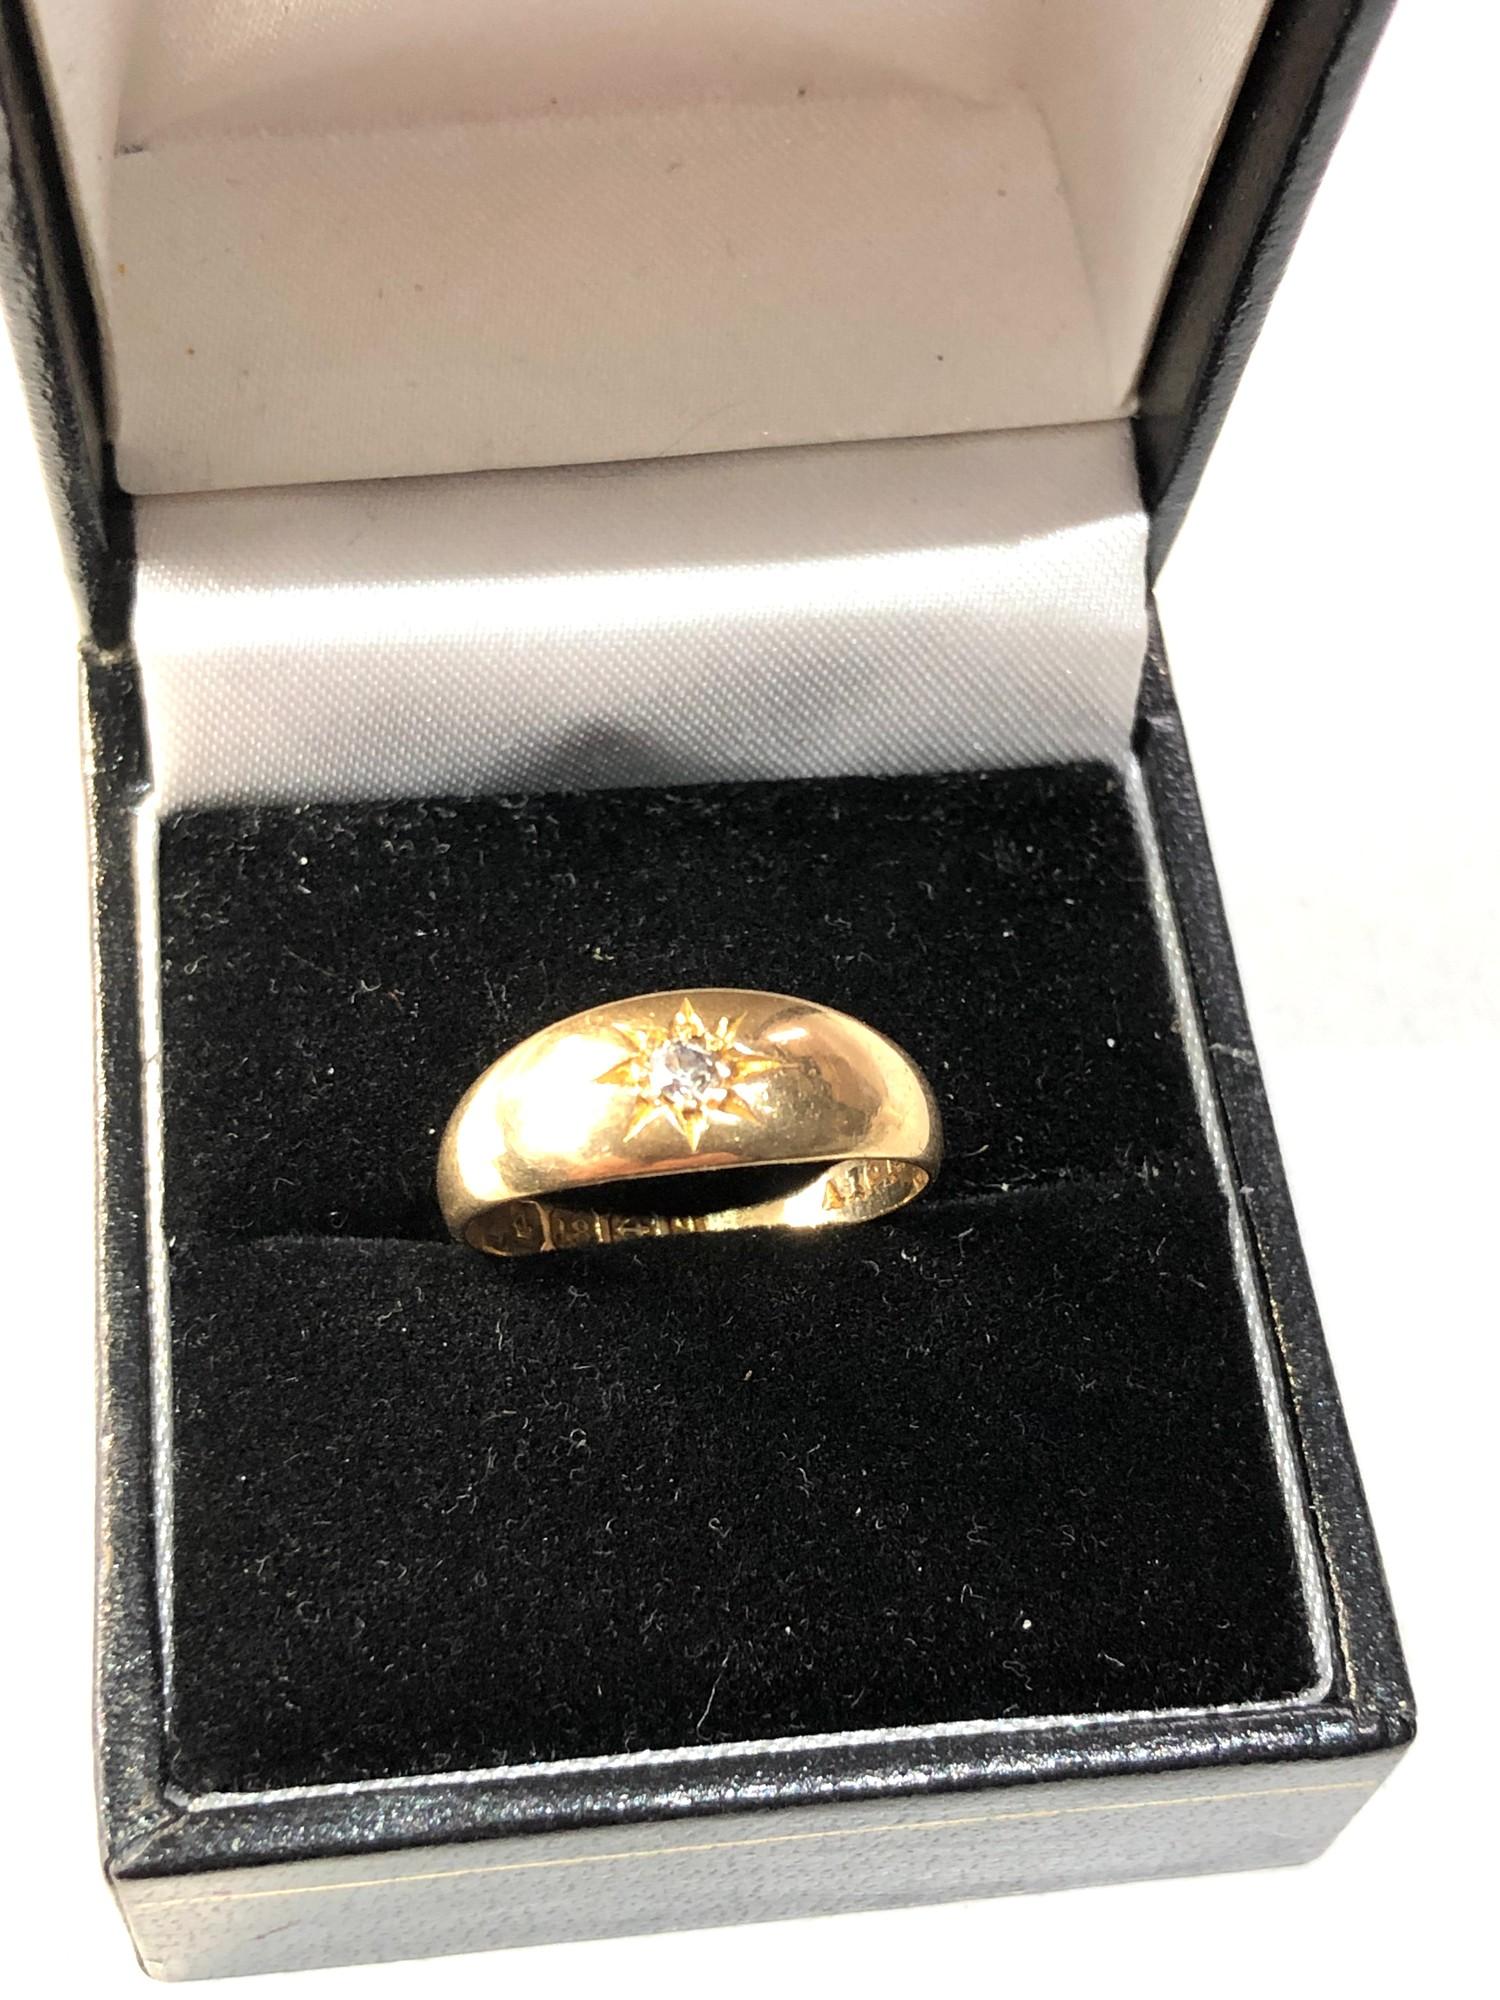 Antique 18ct gold diamond gypsy ring weight 3g